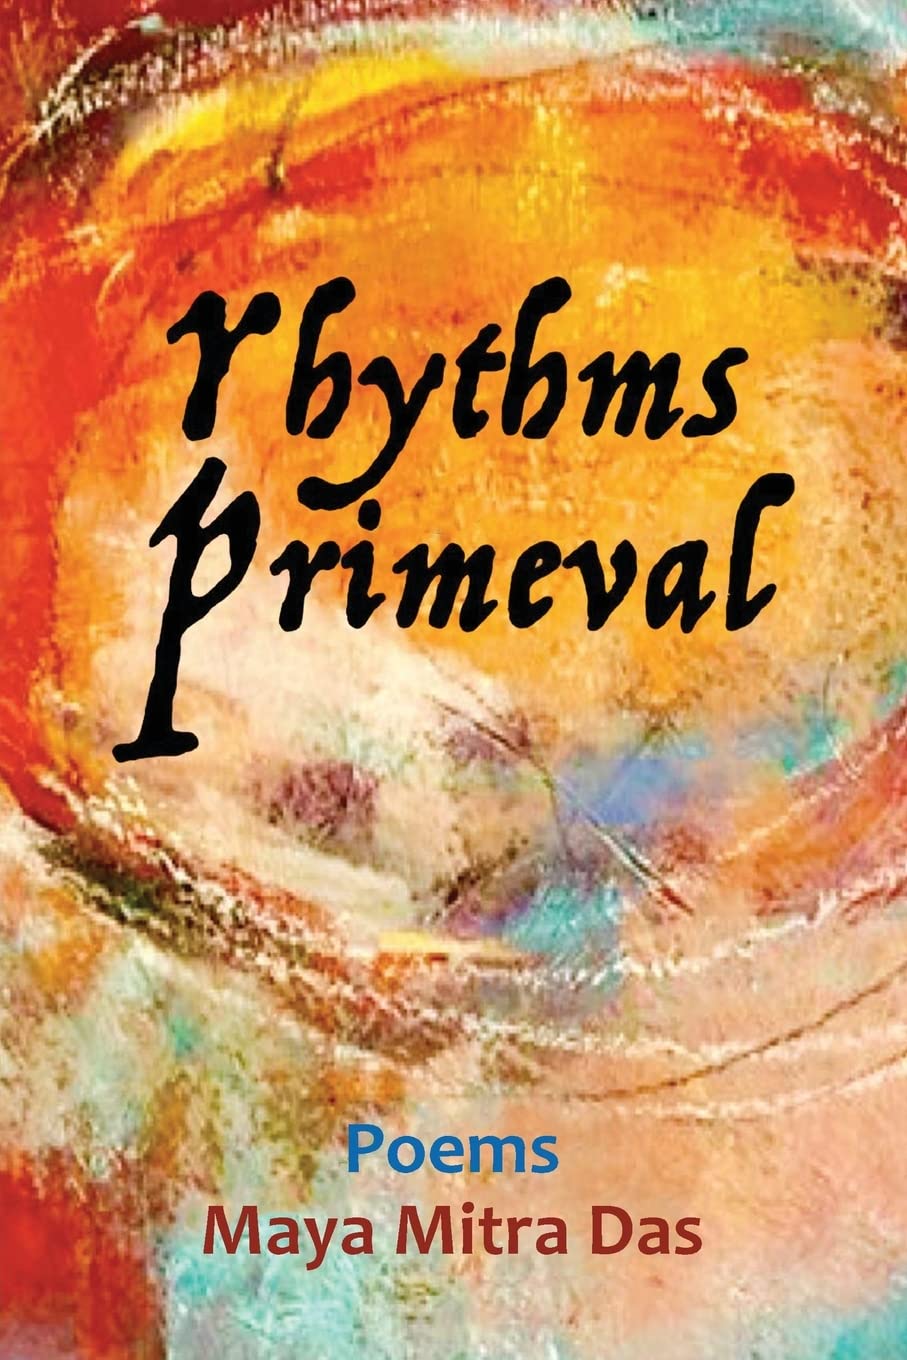 Author's Tranquility Press: Maya Mitra Das Releases "Rhythms Primeval" - A Poetry Collection Exploring the Alchemy of Personal Myth